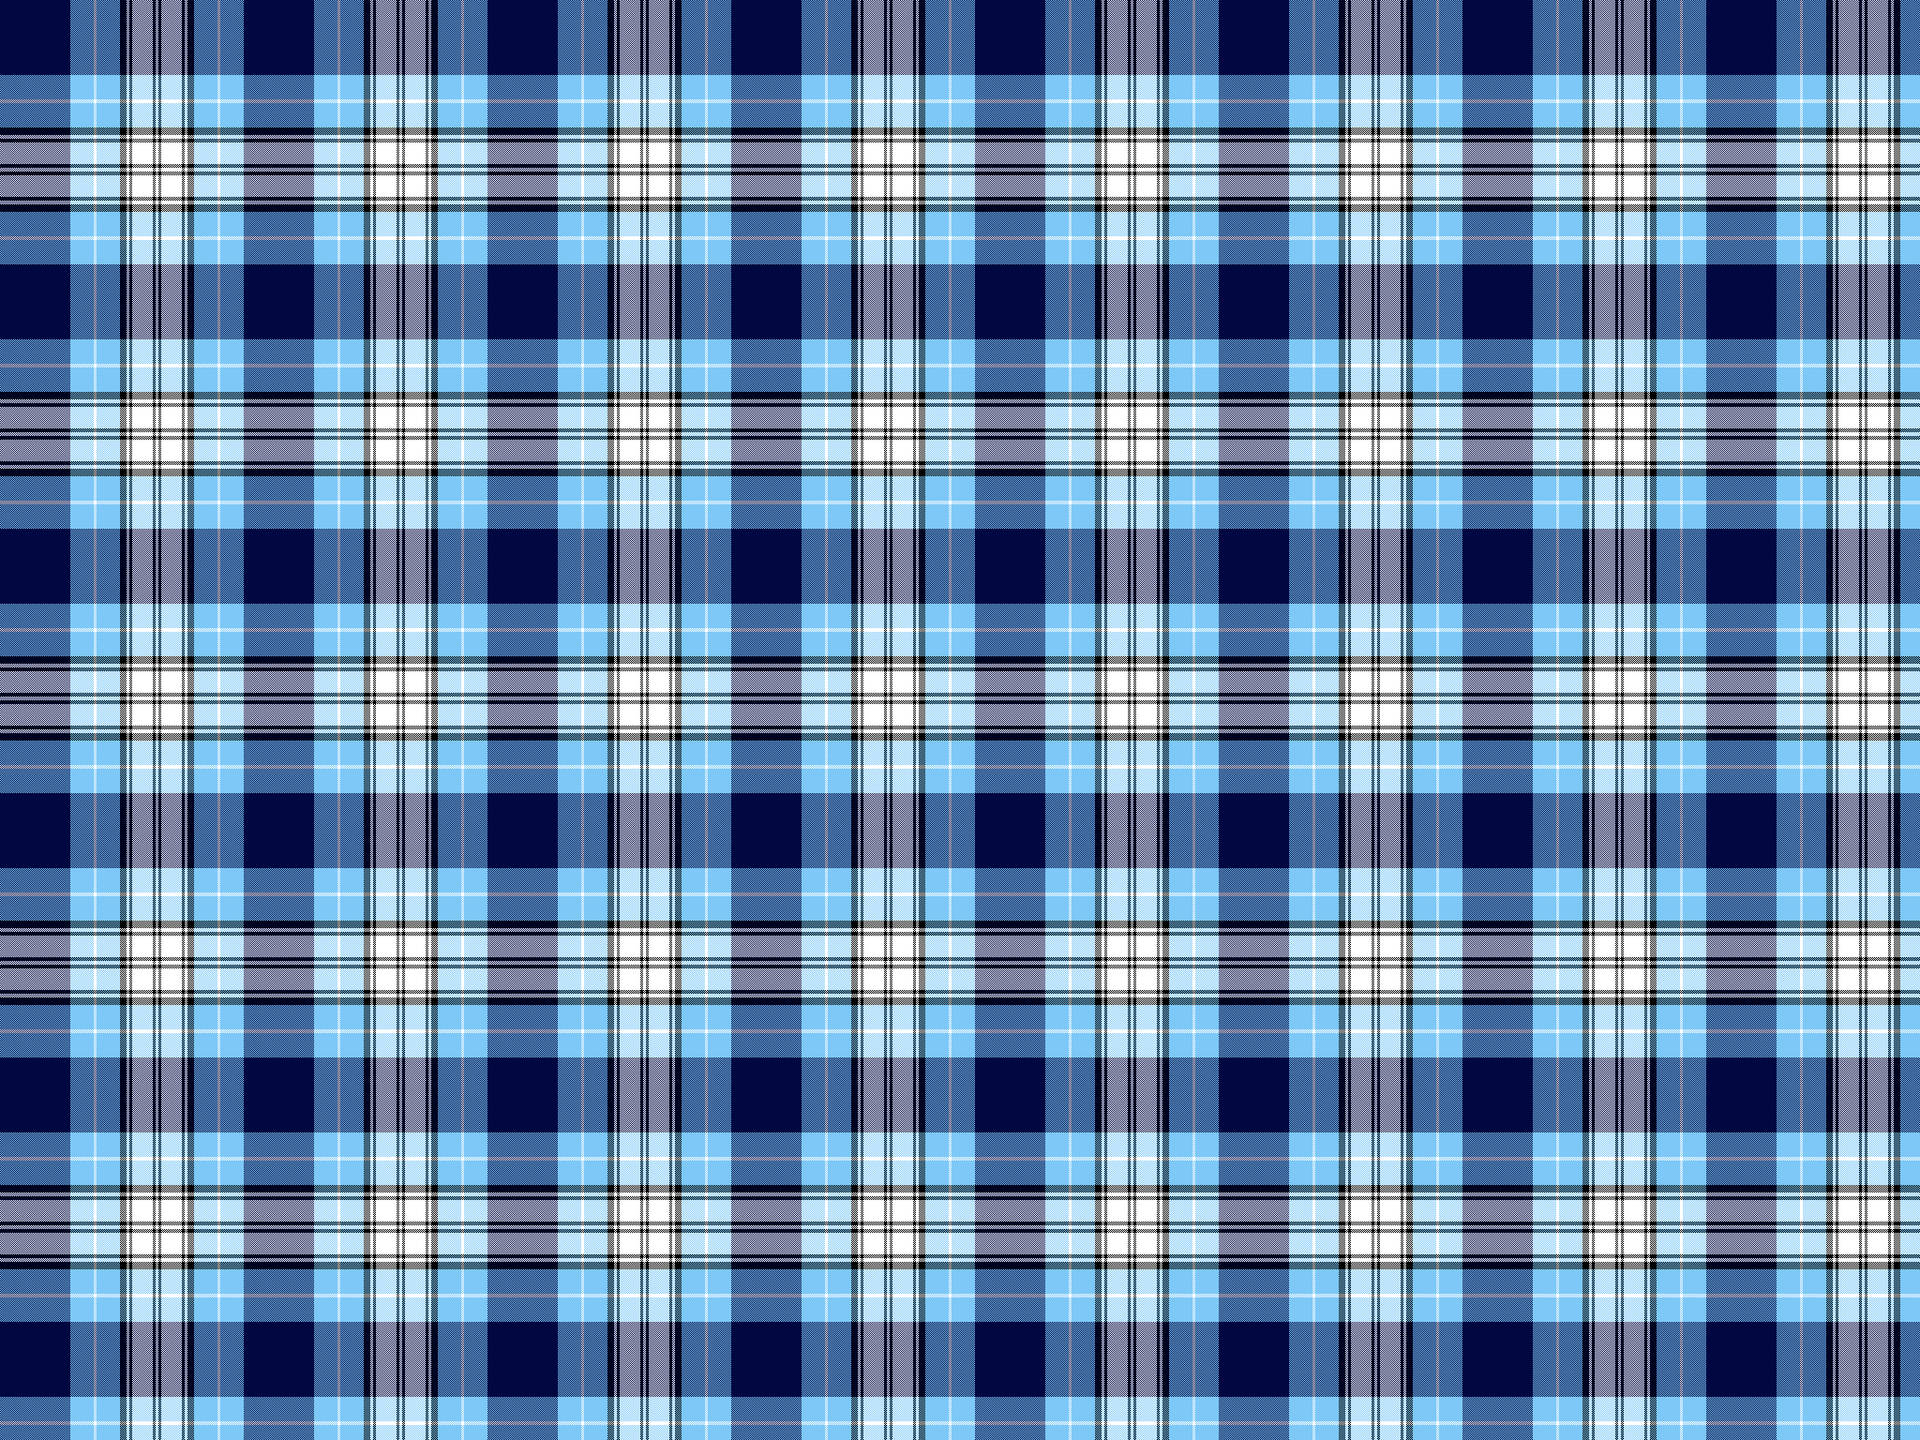 Seamless Plaid Check Pattern Blue And White Design For Wallpaper Fabric  Textile Paper Simple Background Stock Illustration  Download Image Now   iStock